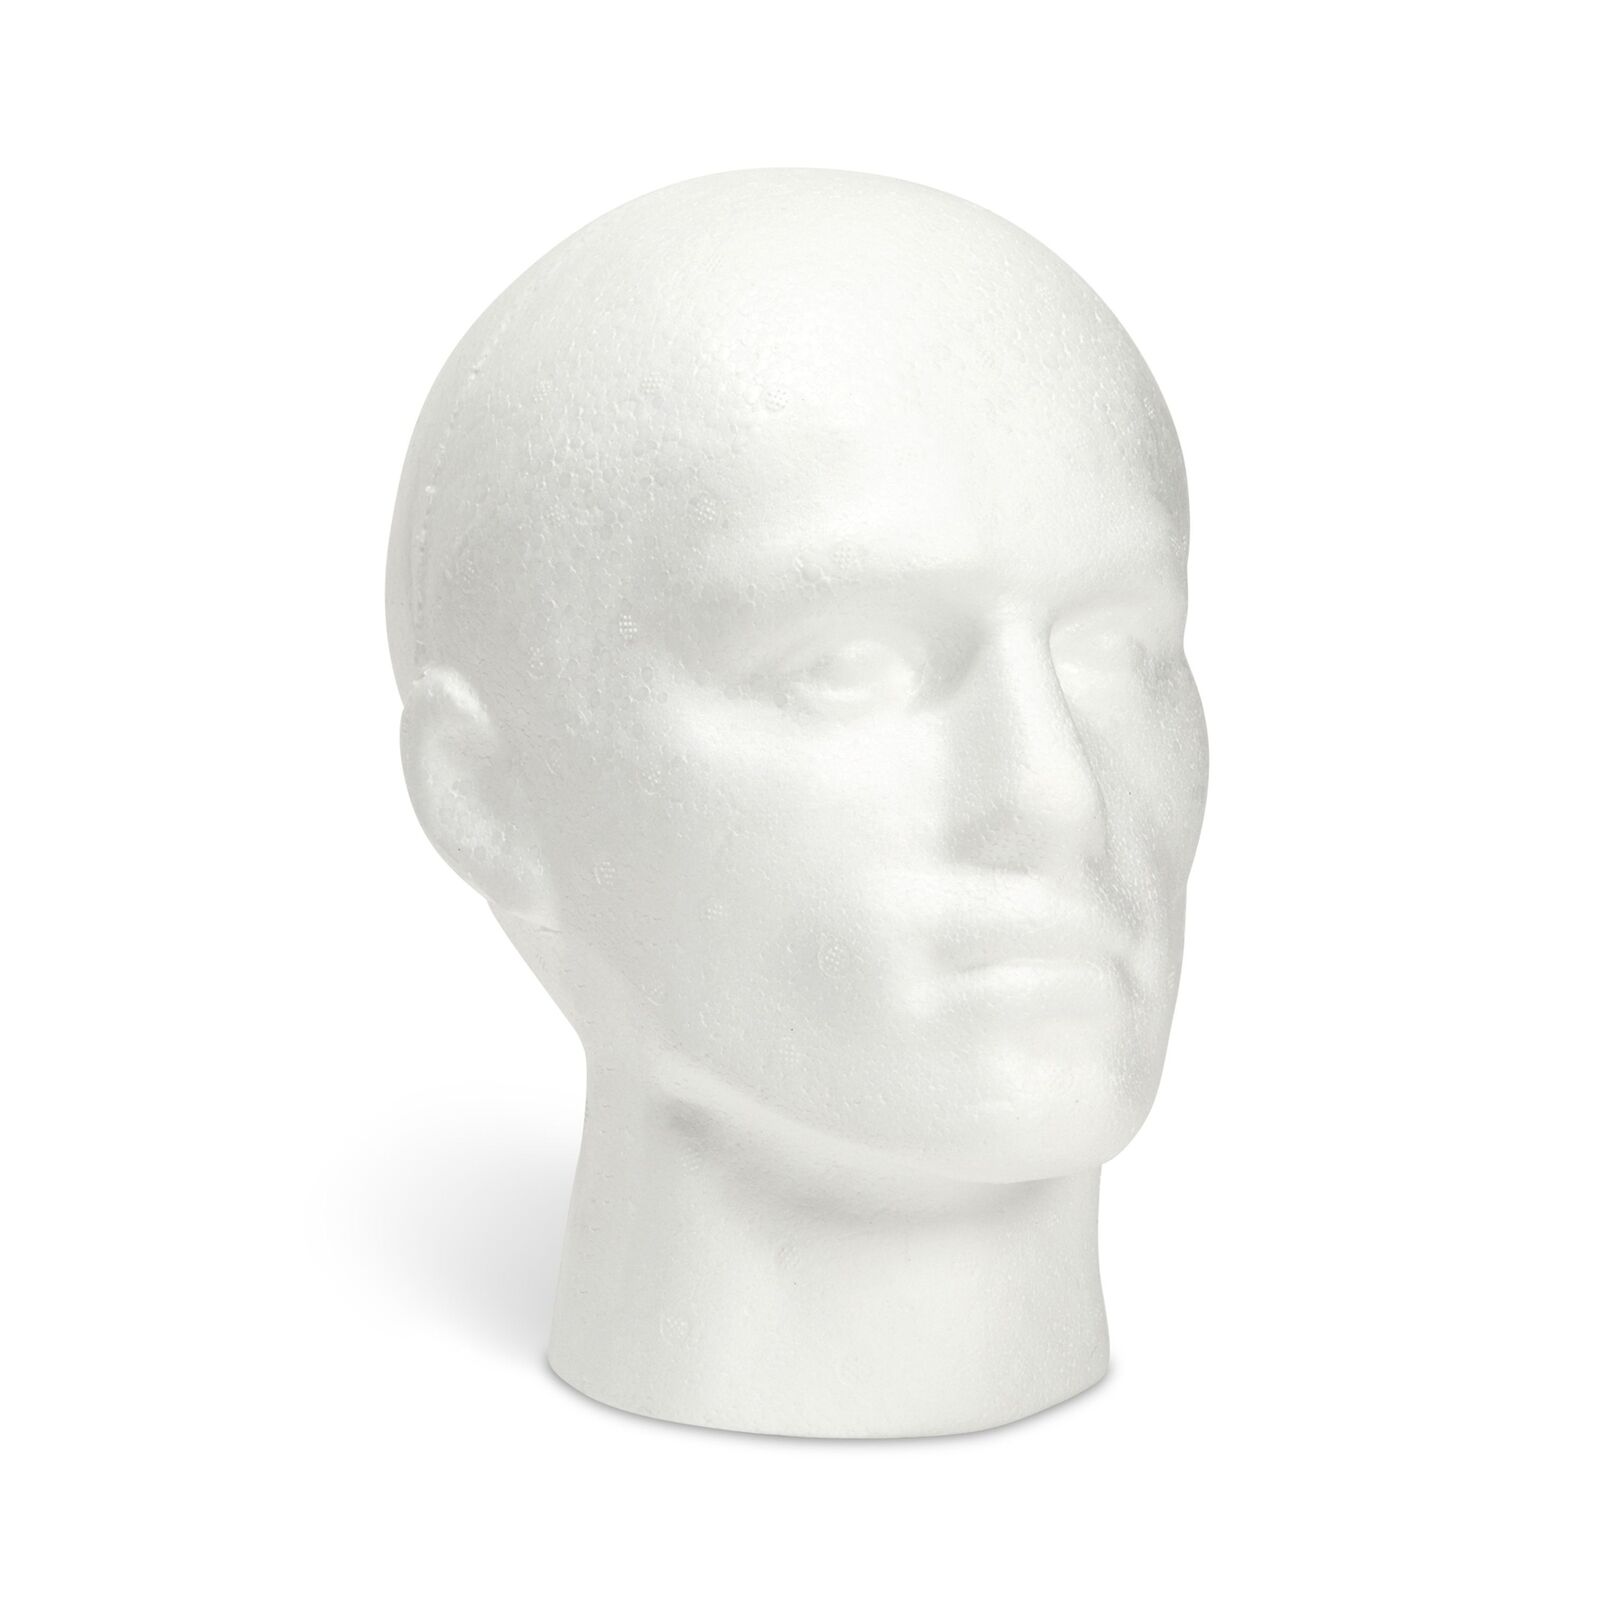 Male Foam Head Form, Mannequin Display for Masks, Hats, Wigs (White, 9x11 in)